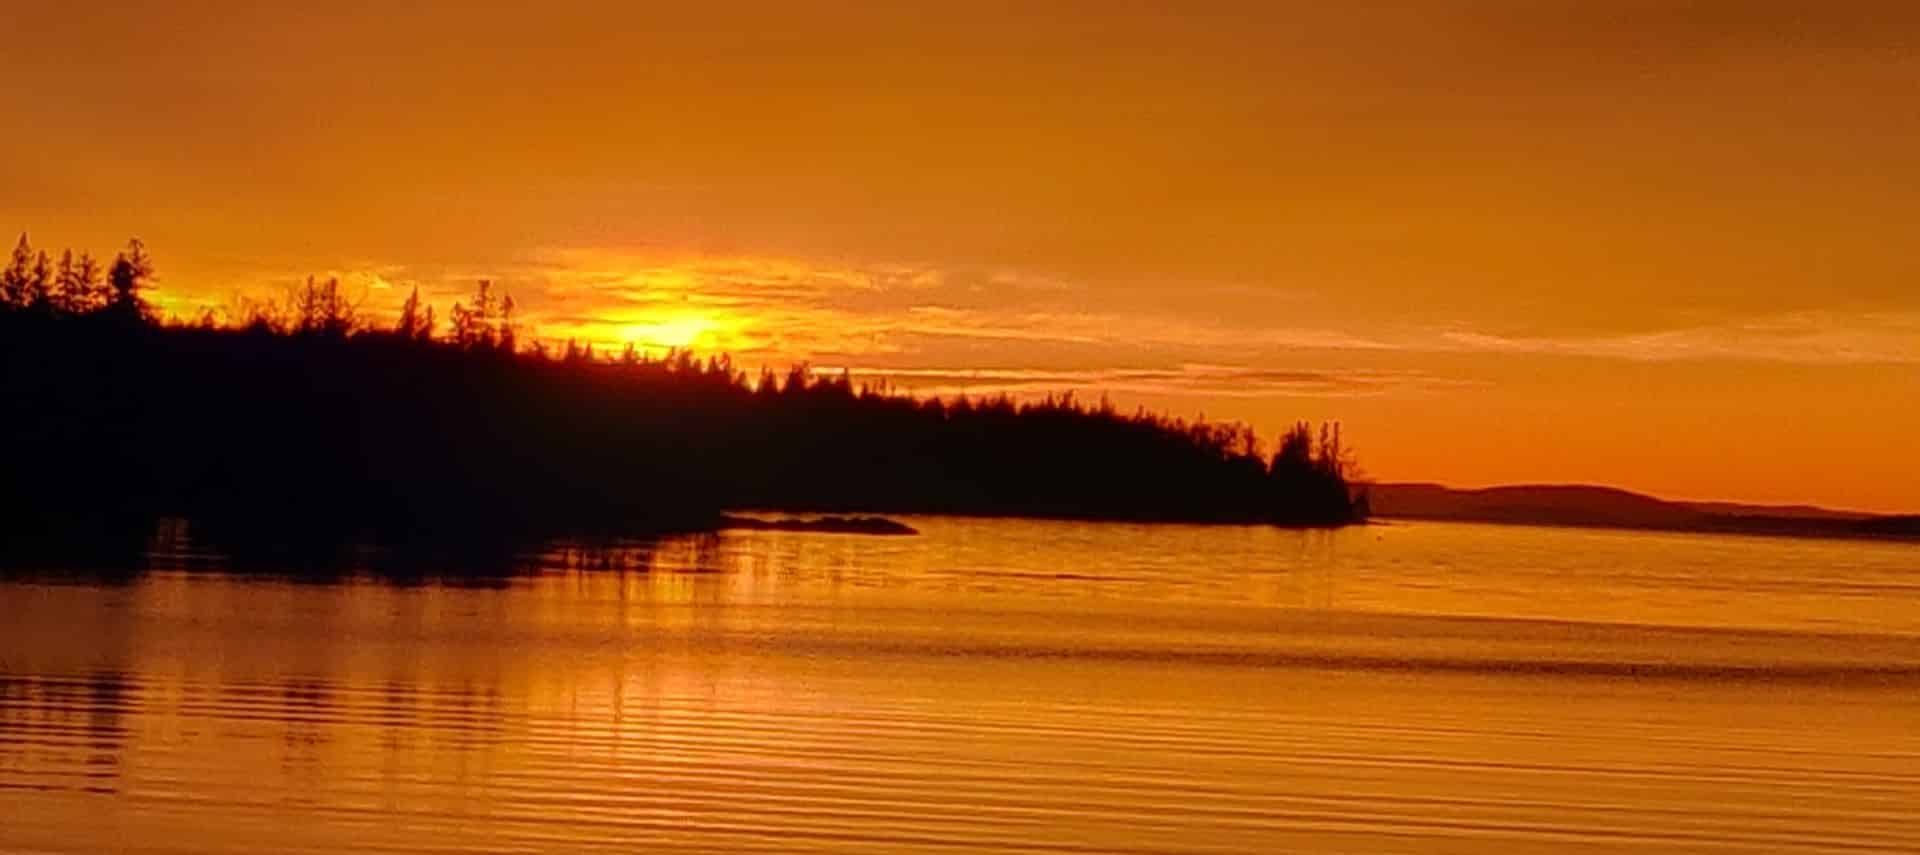 View of trees near a body of water with the sun setting reflecting orange hues in the sky and water